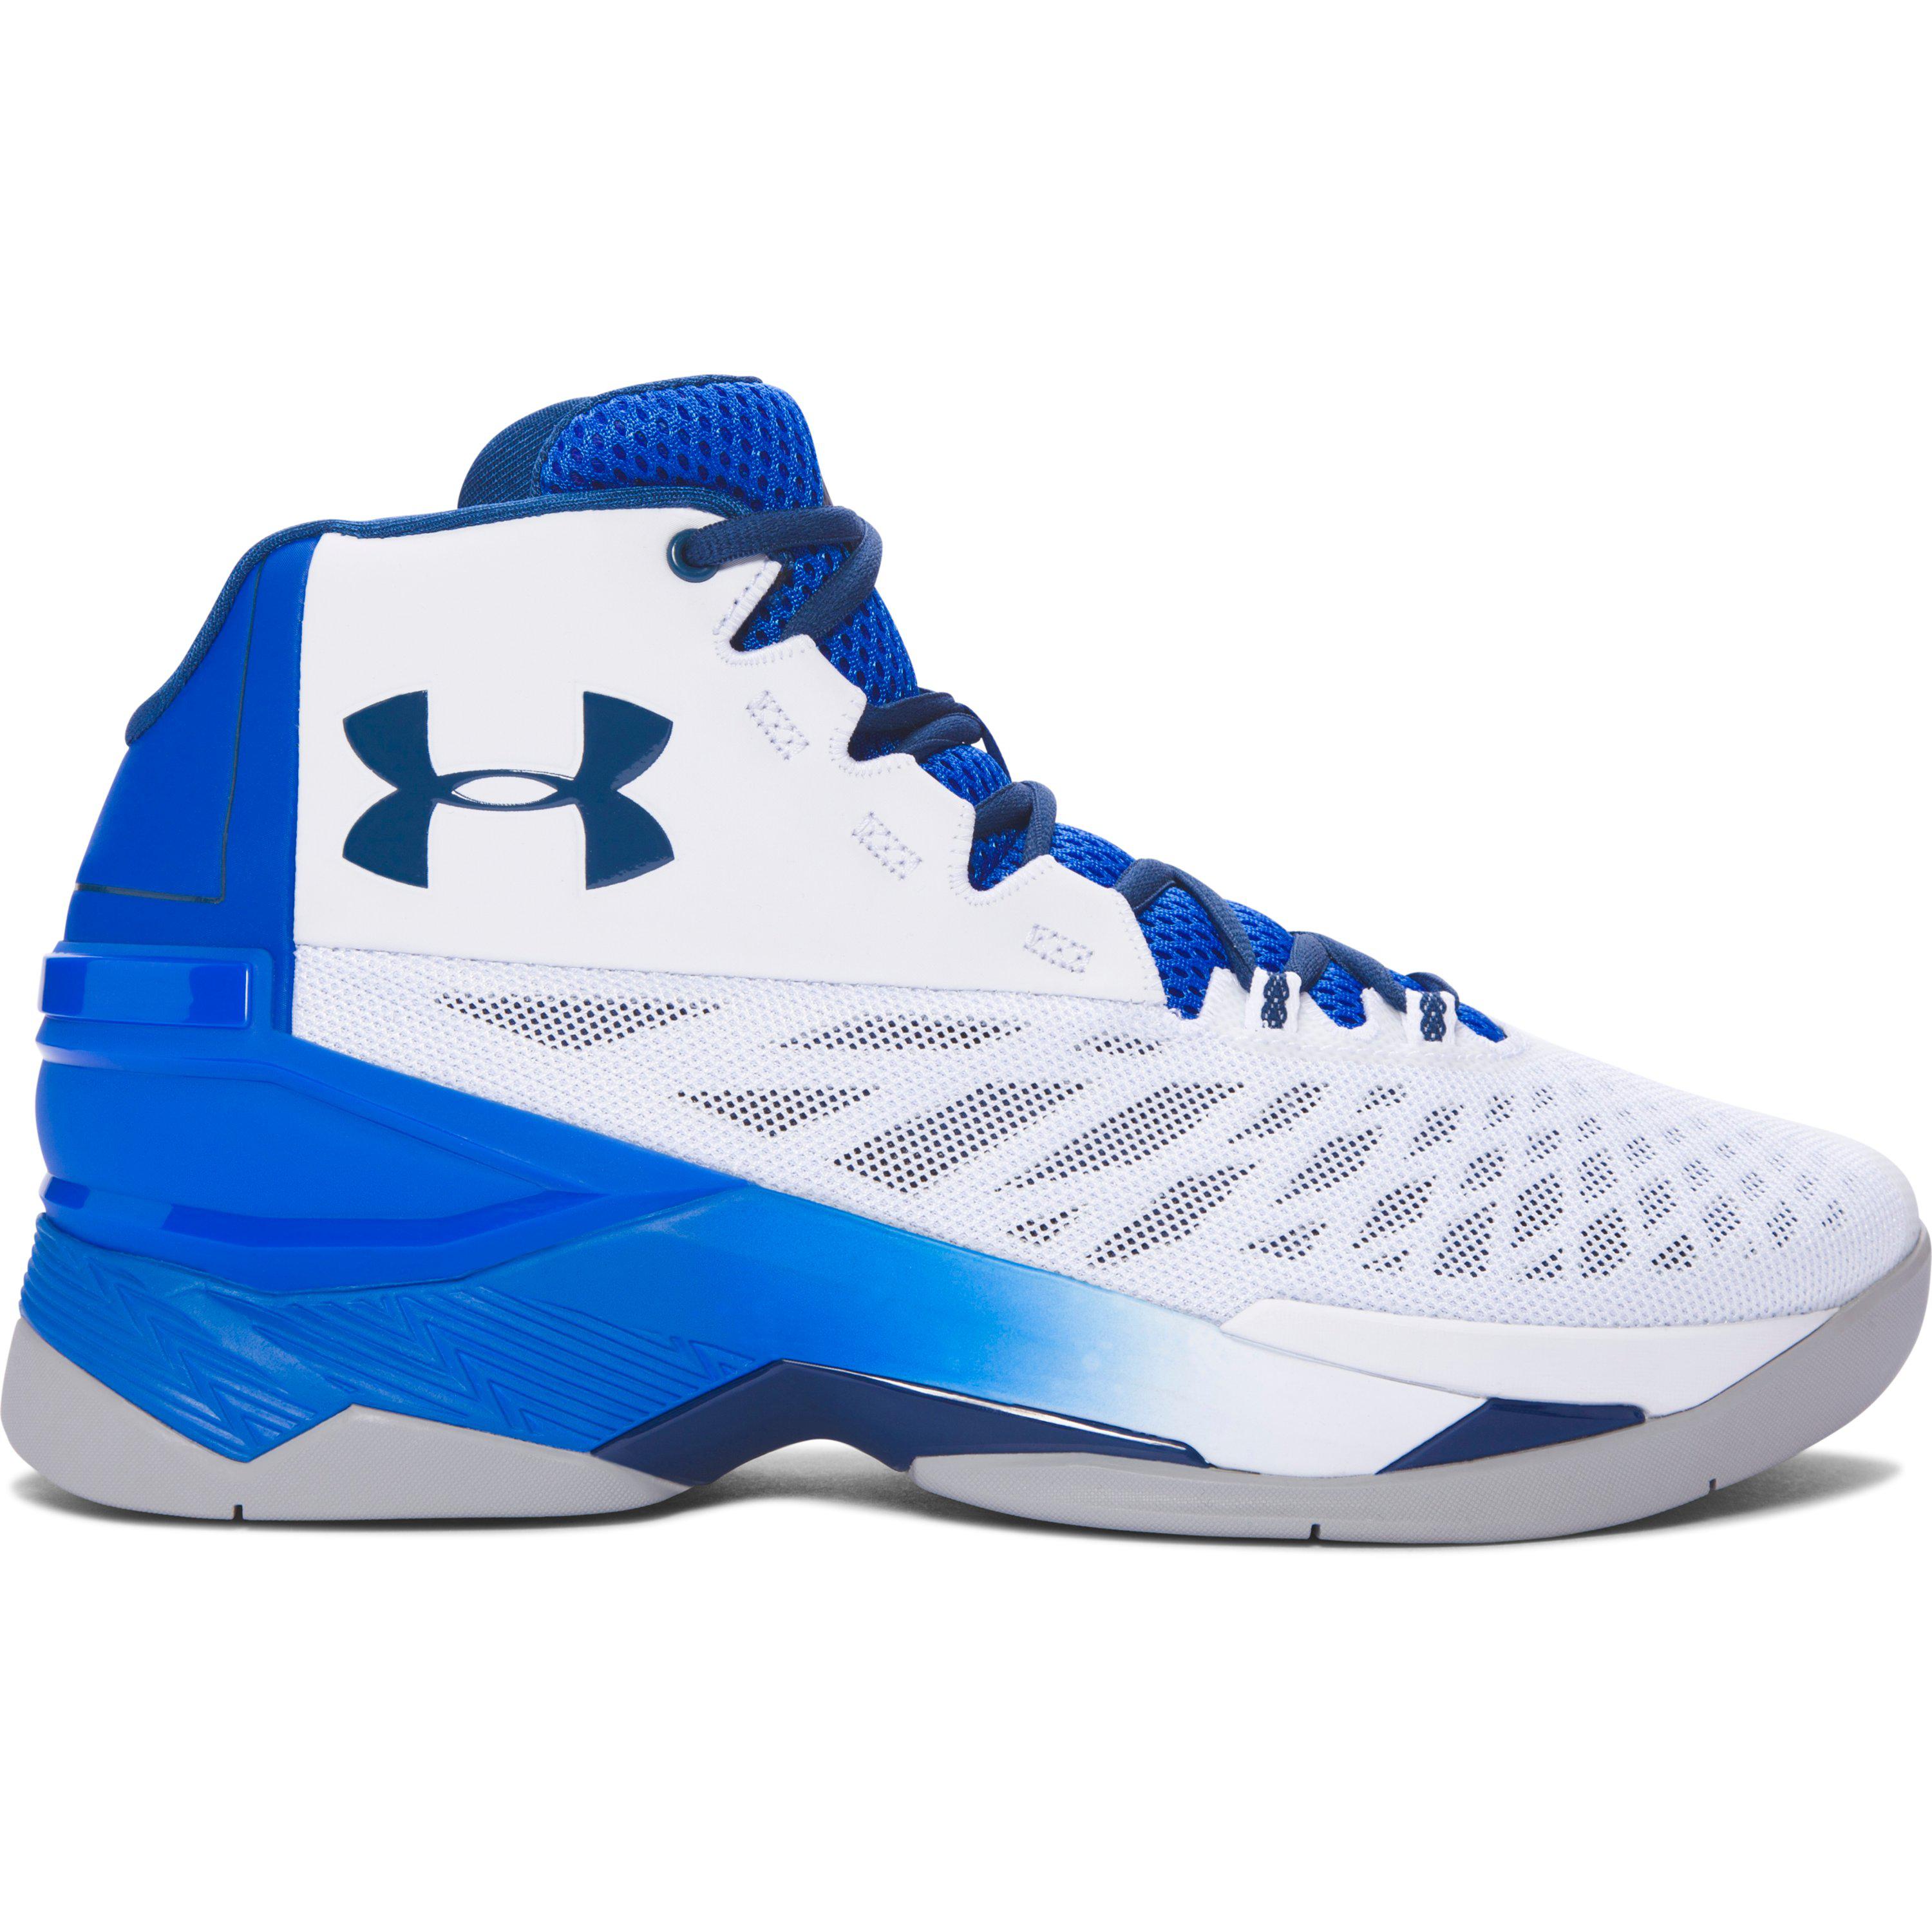 Under Armour Leather Men's Ua Longshot Basketball Shoes in White/Ultra ...